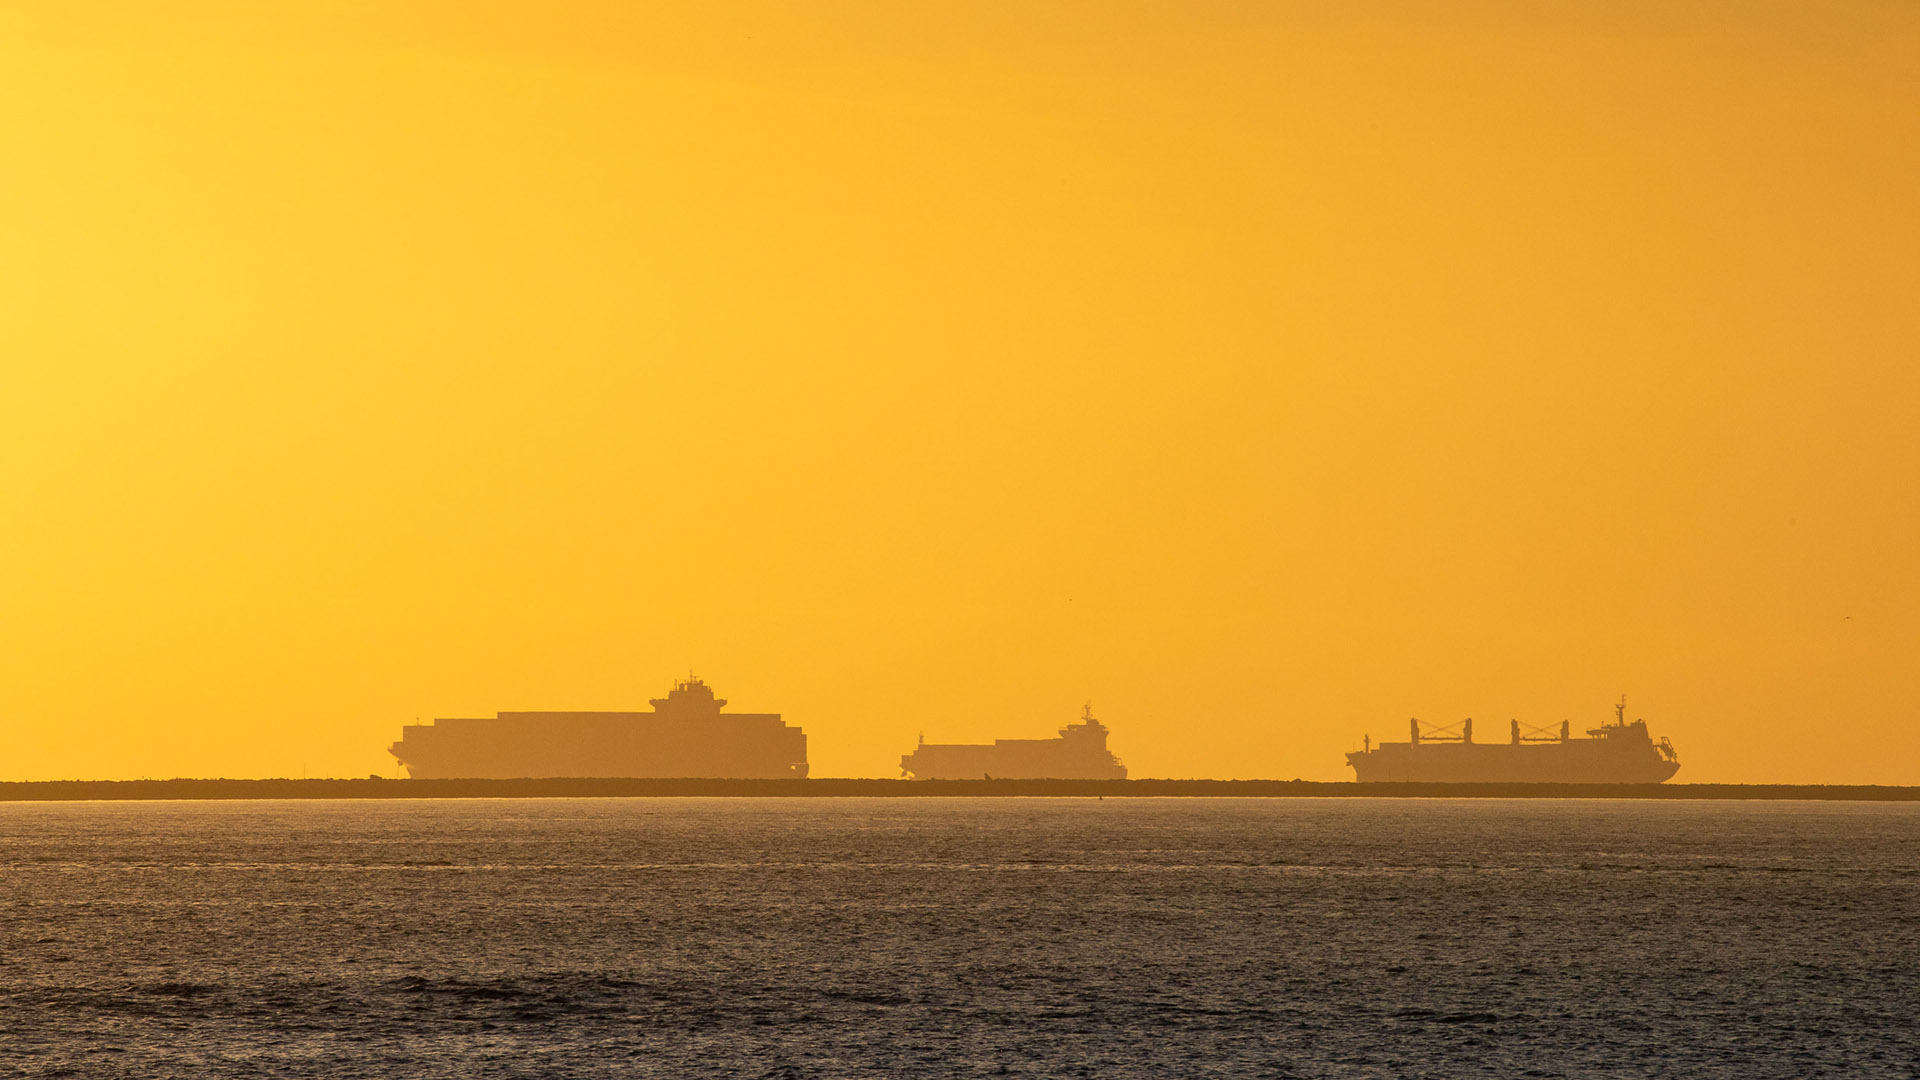 Ships in LB Port at sunset